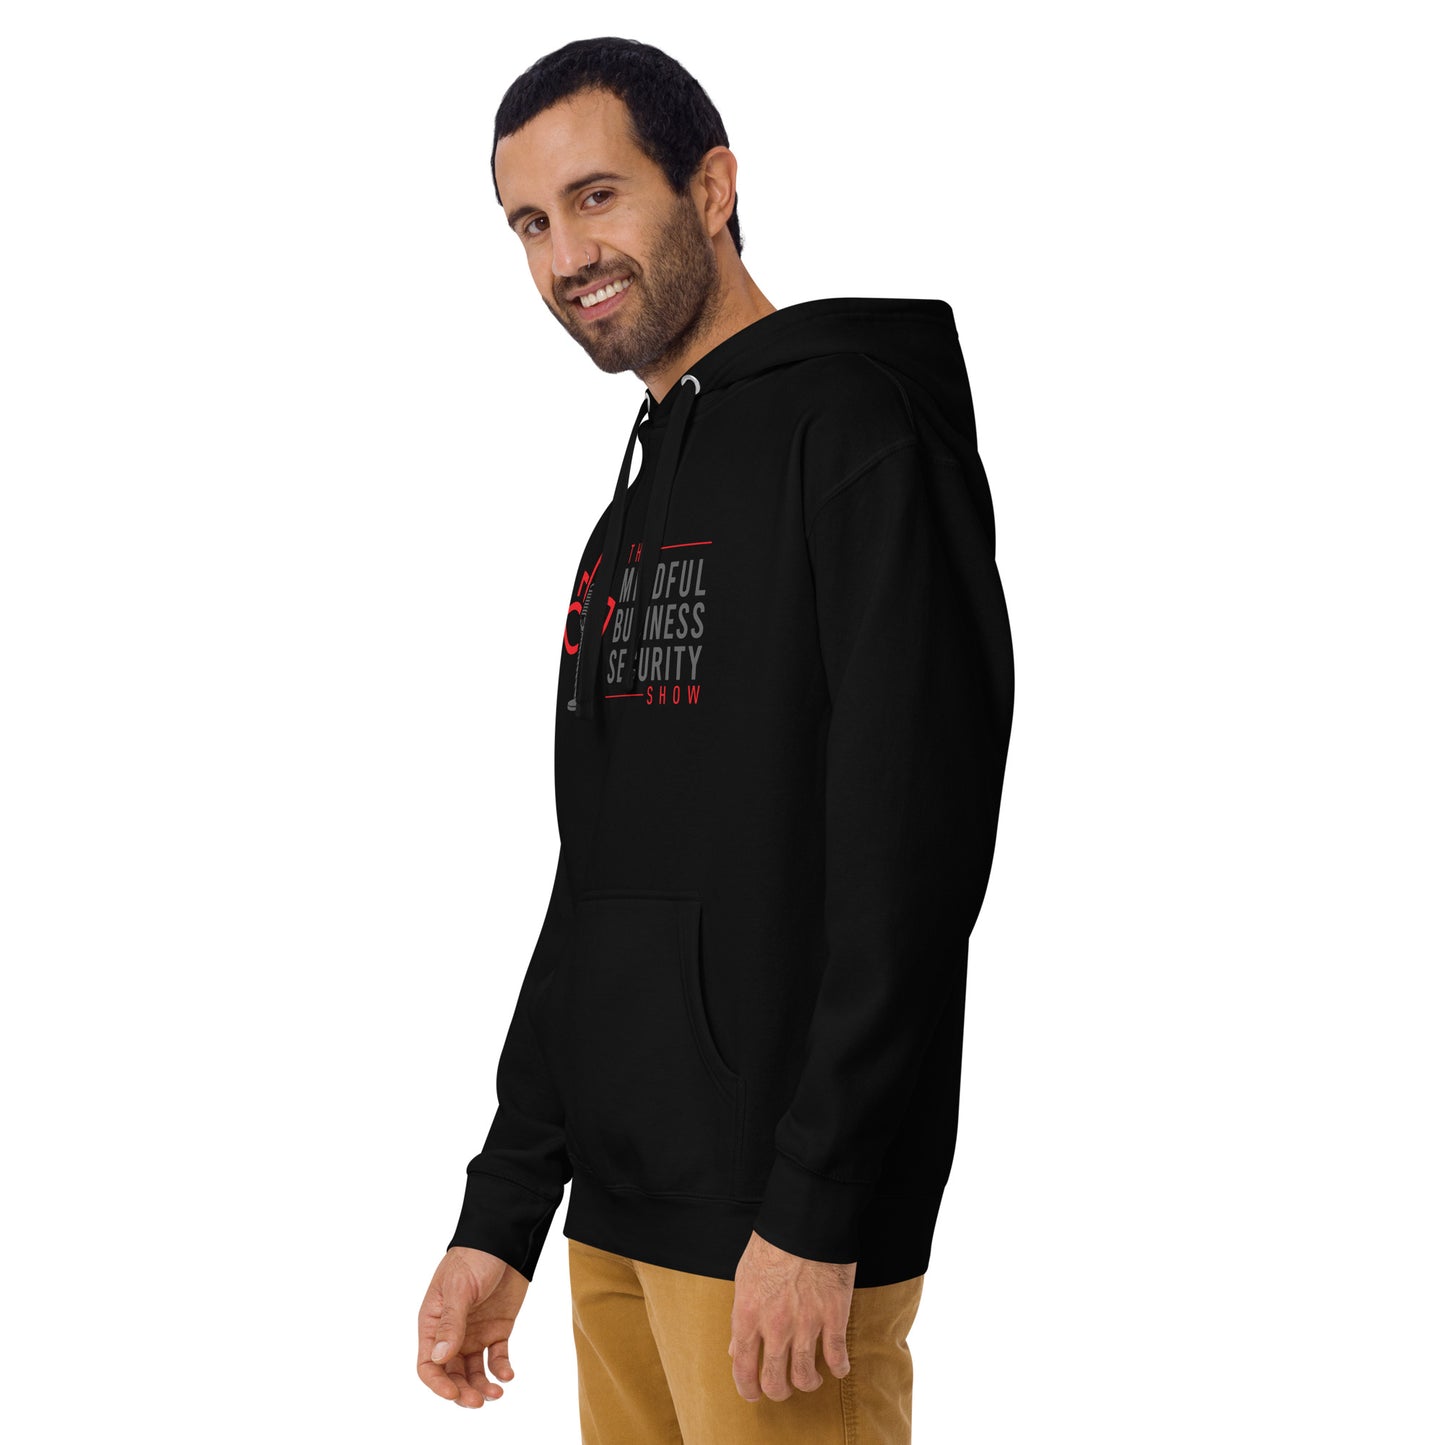 The Mindful Business Security Hoodie